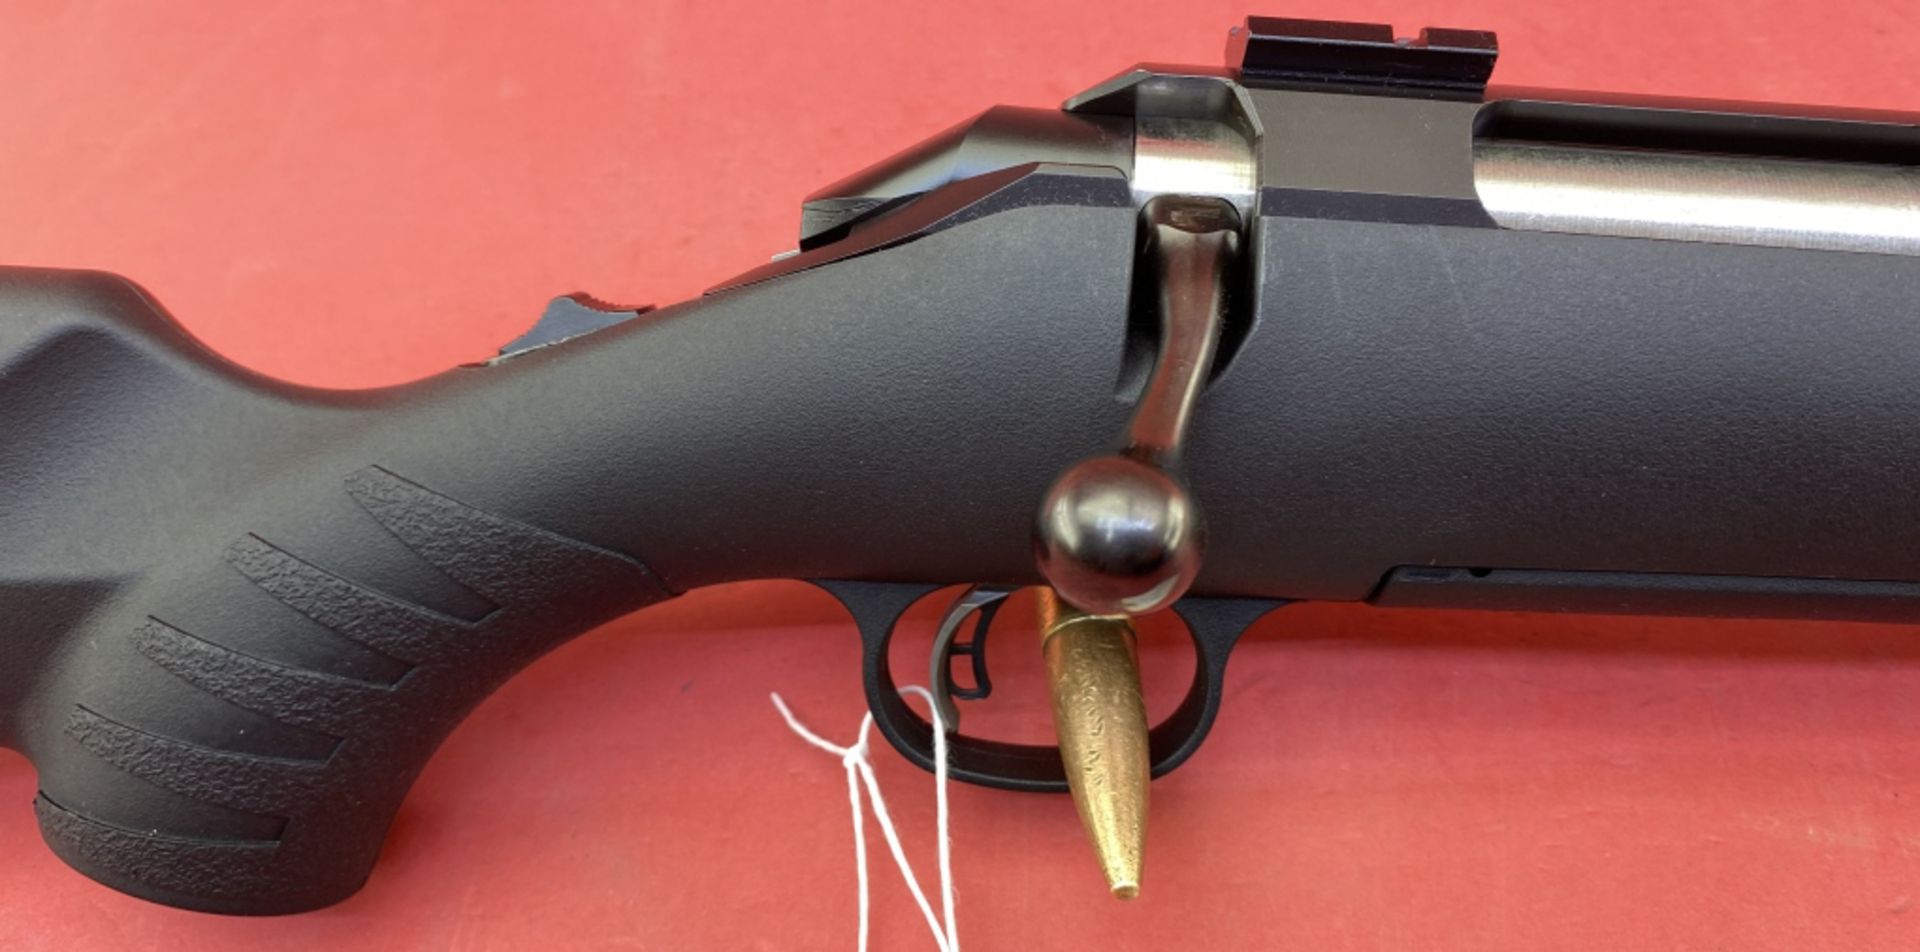 Ruger American Rifle .308 Rifle - Image 3 of 9